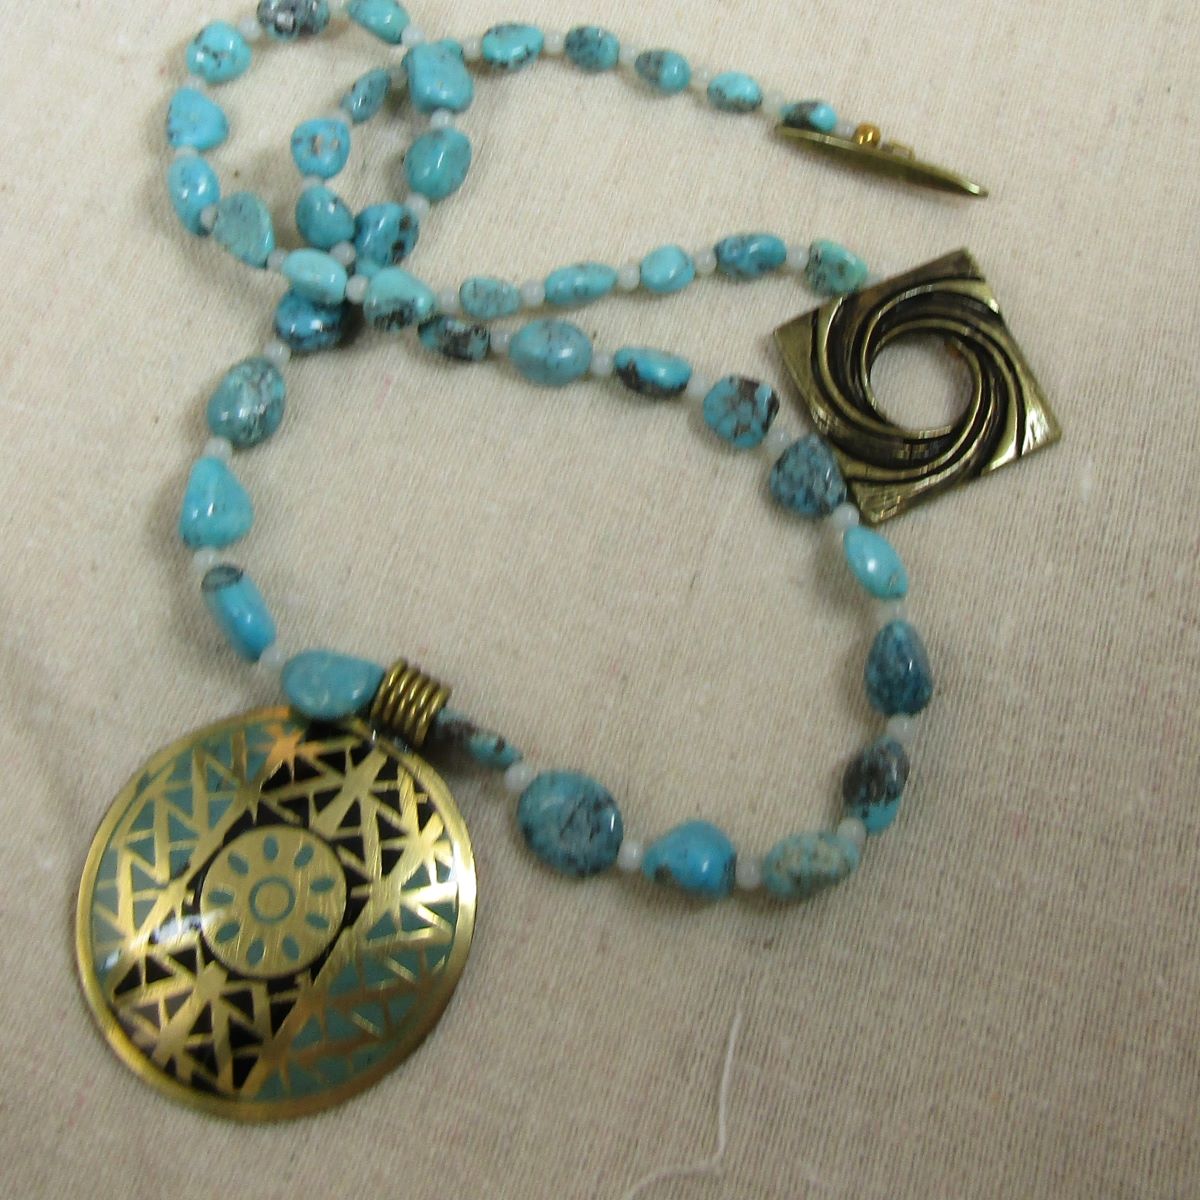 Turquoise Nugget Necklace with Medallion - VP's Jewelry